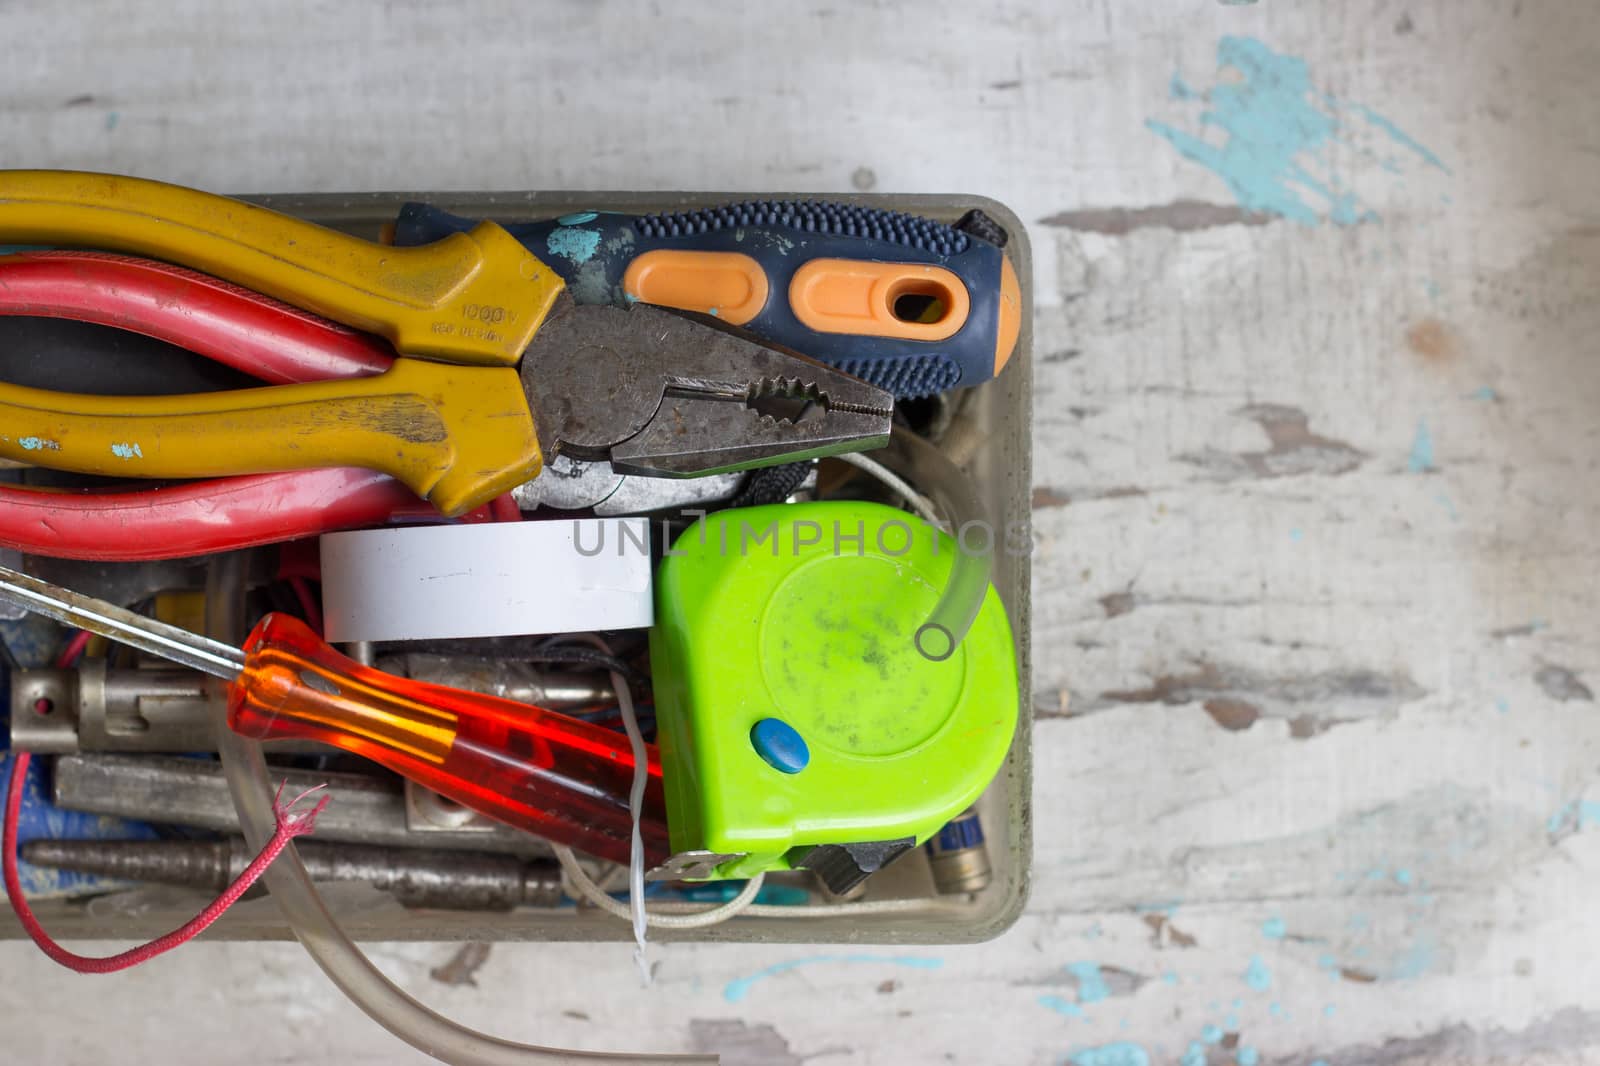 Various tools in the box, on white background